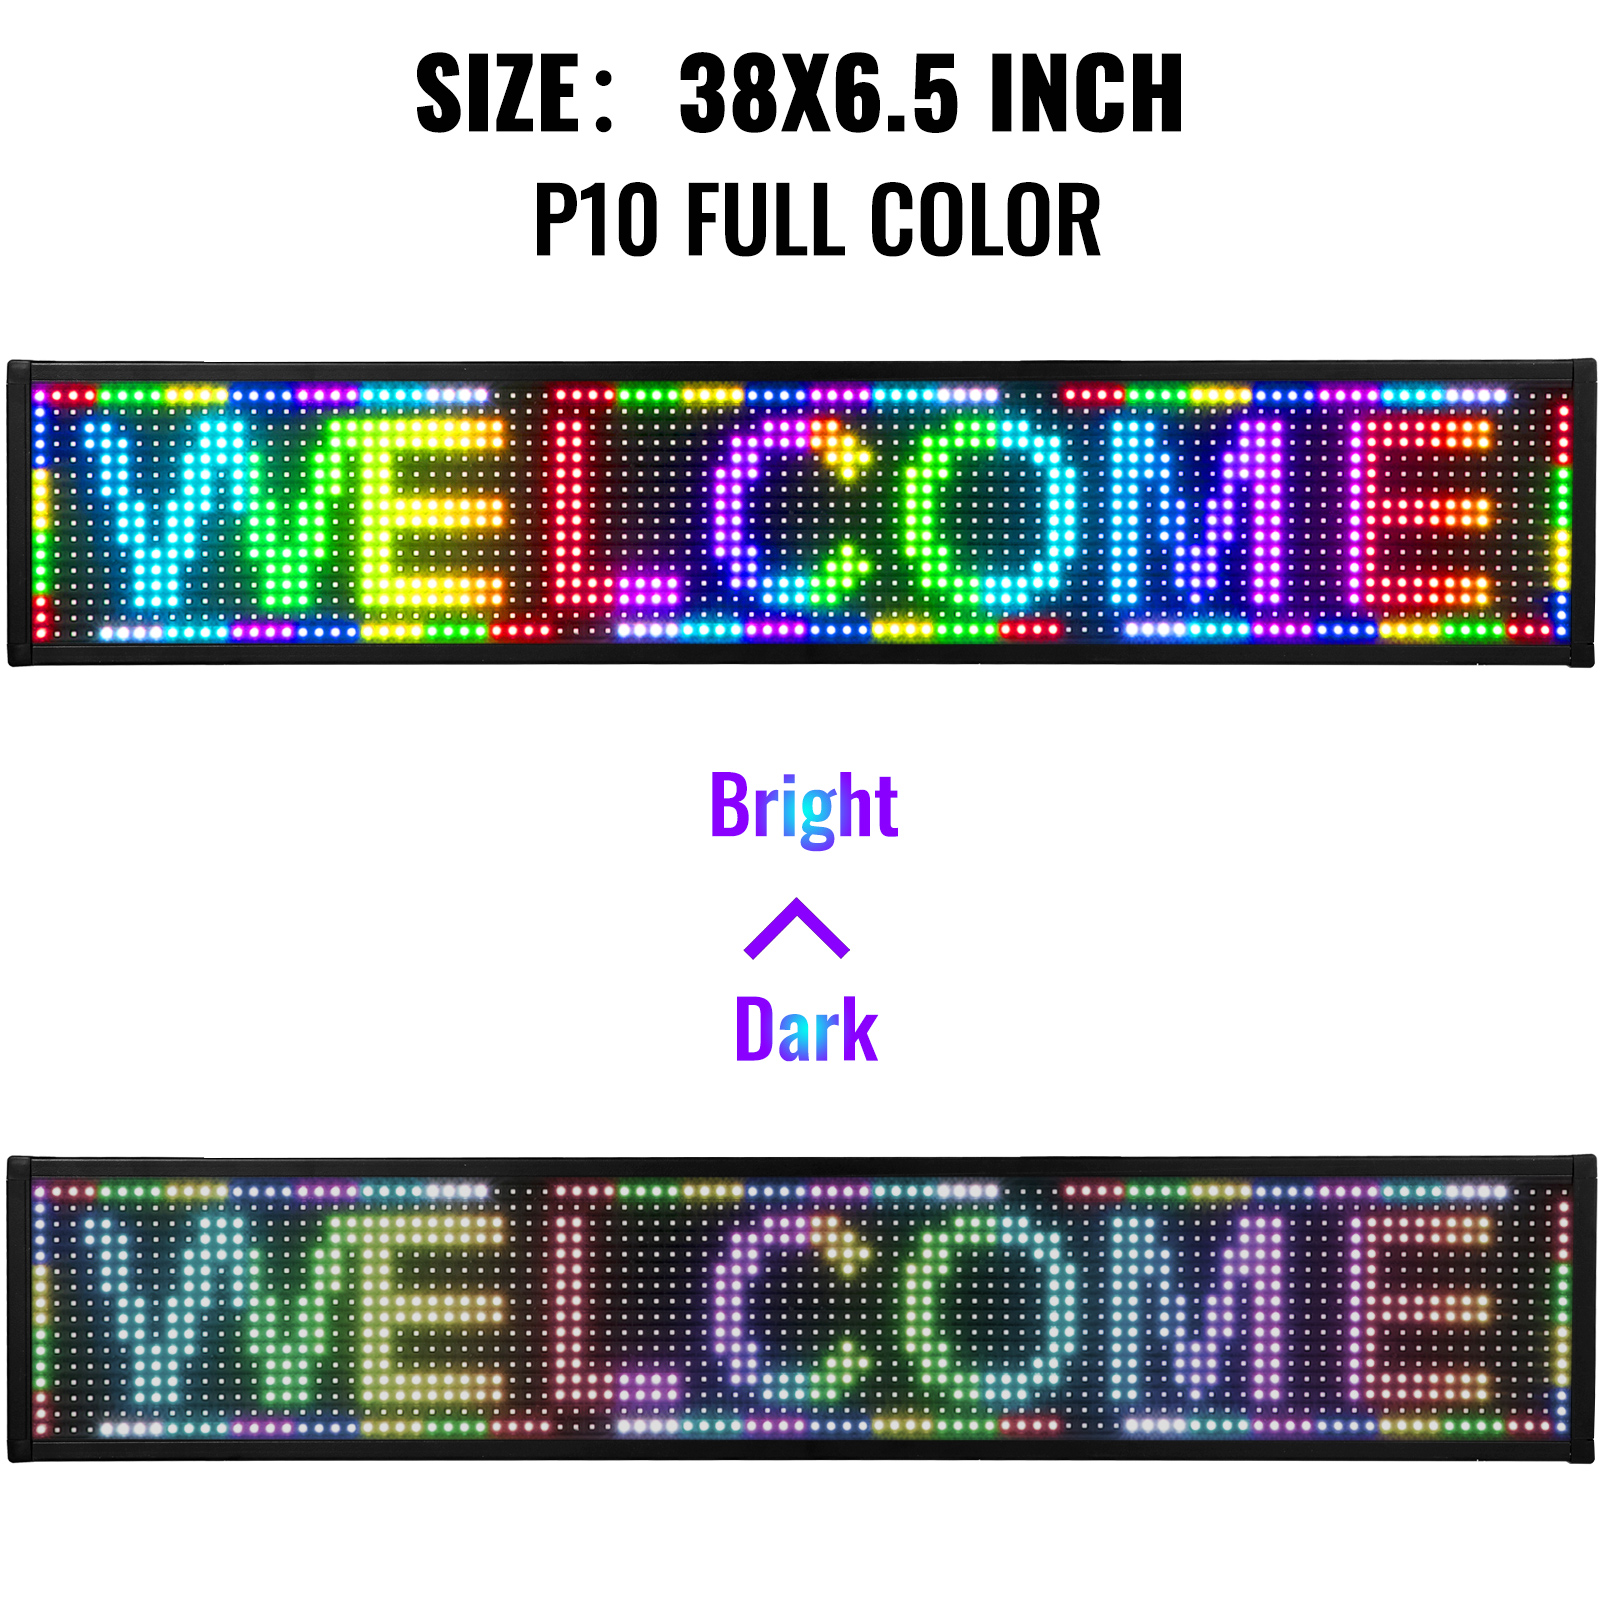 Qolr Pro 3x38 Outdoor LED Sign